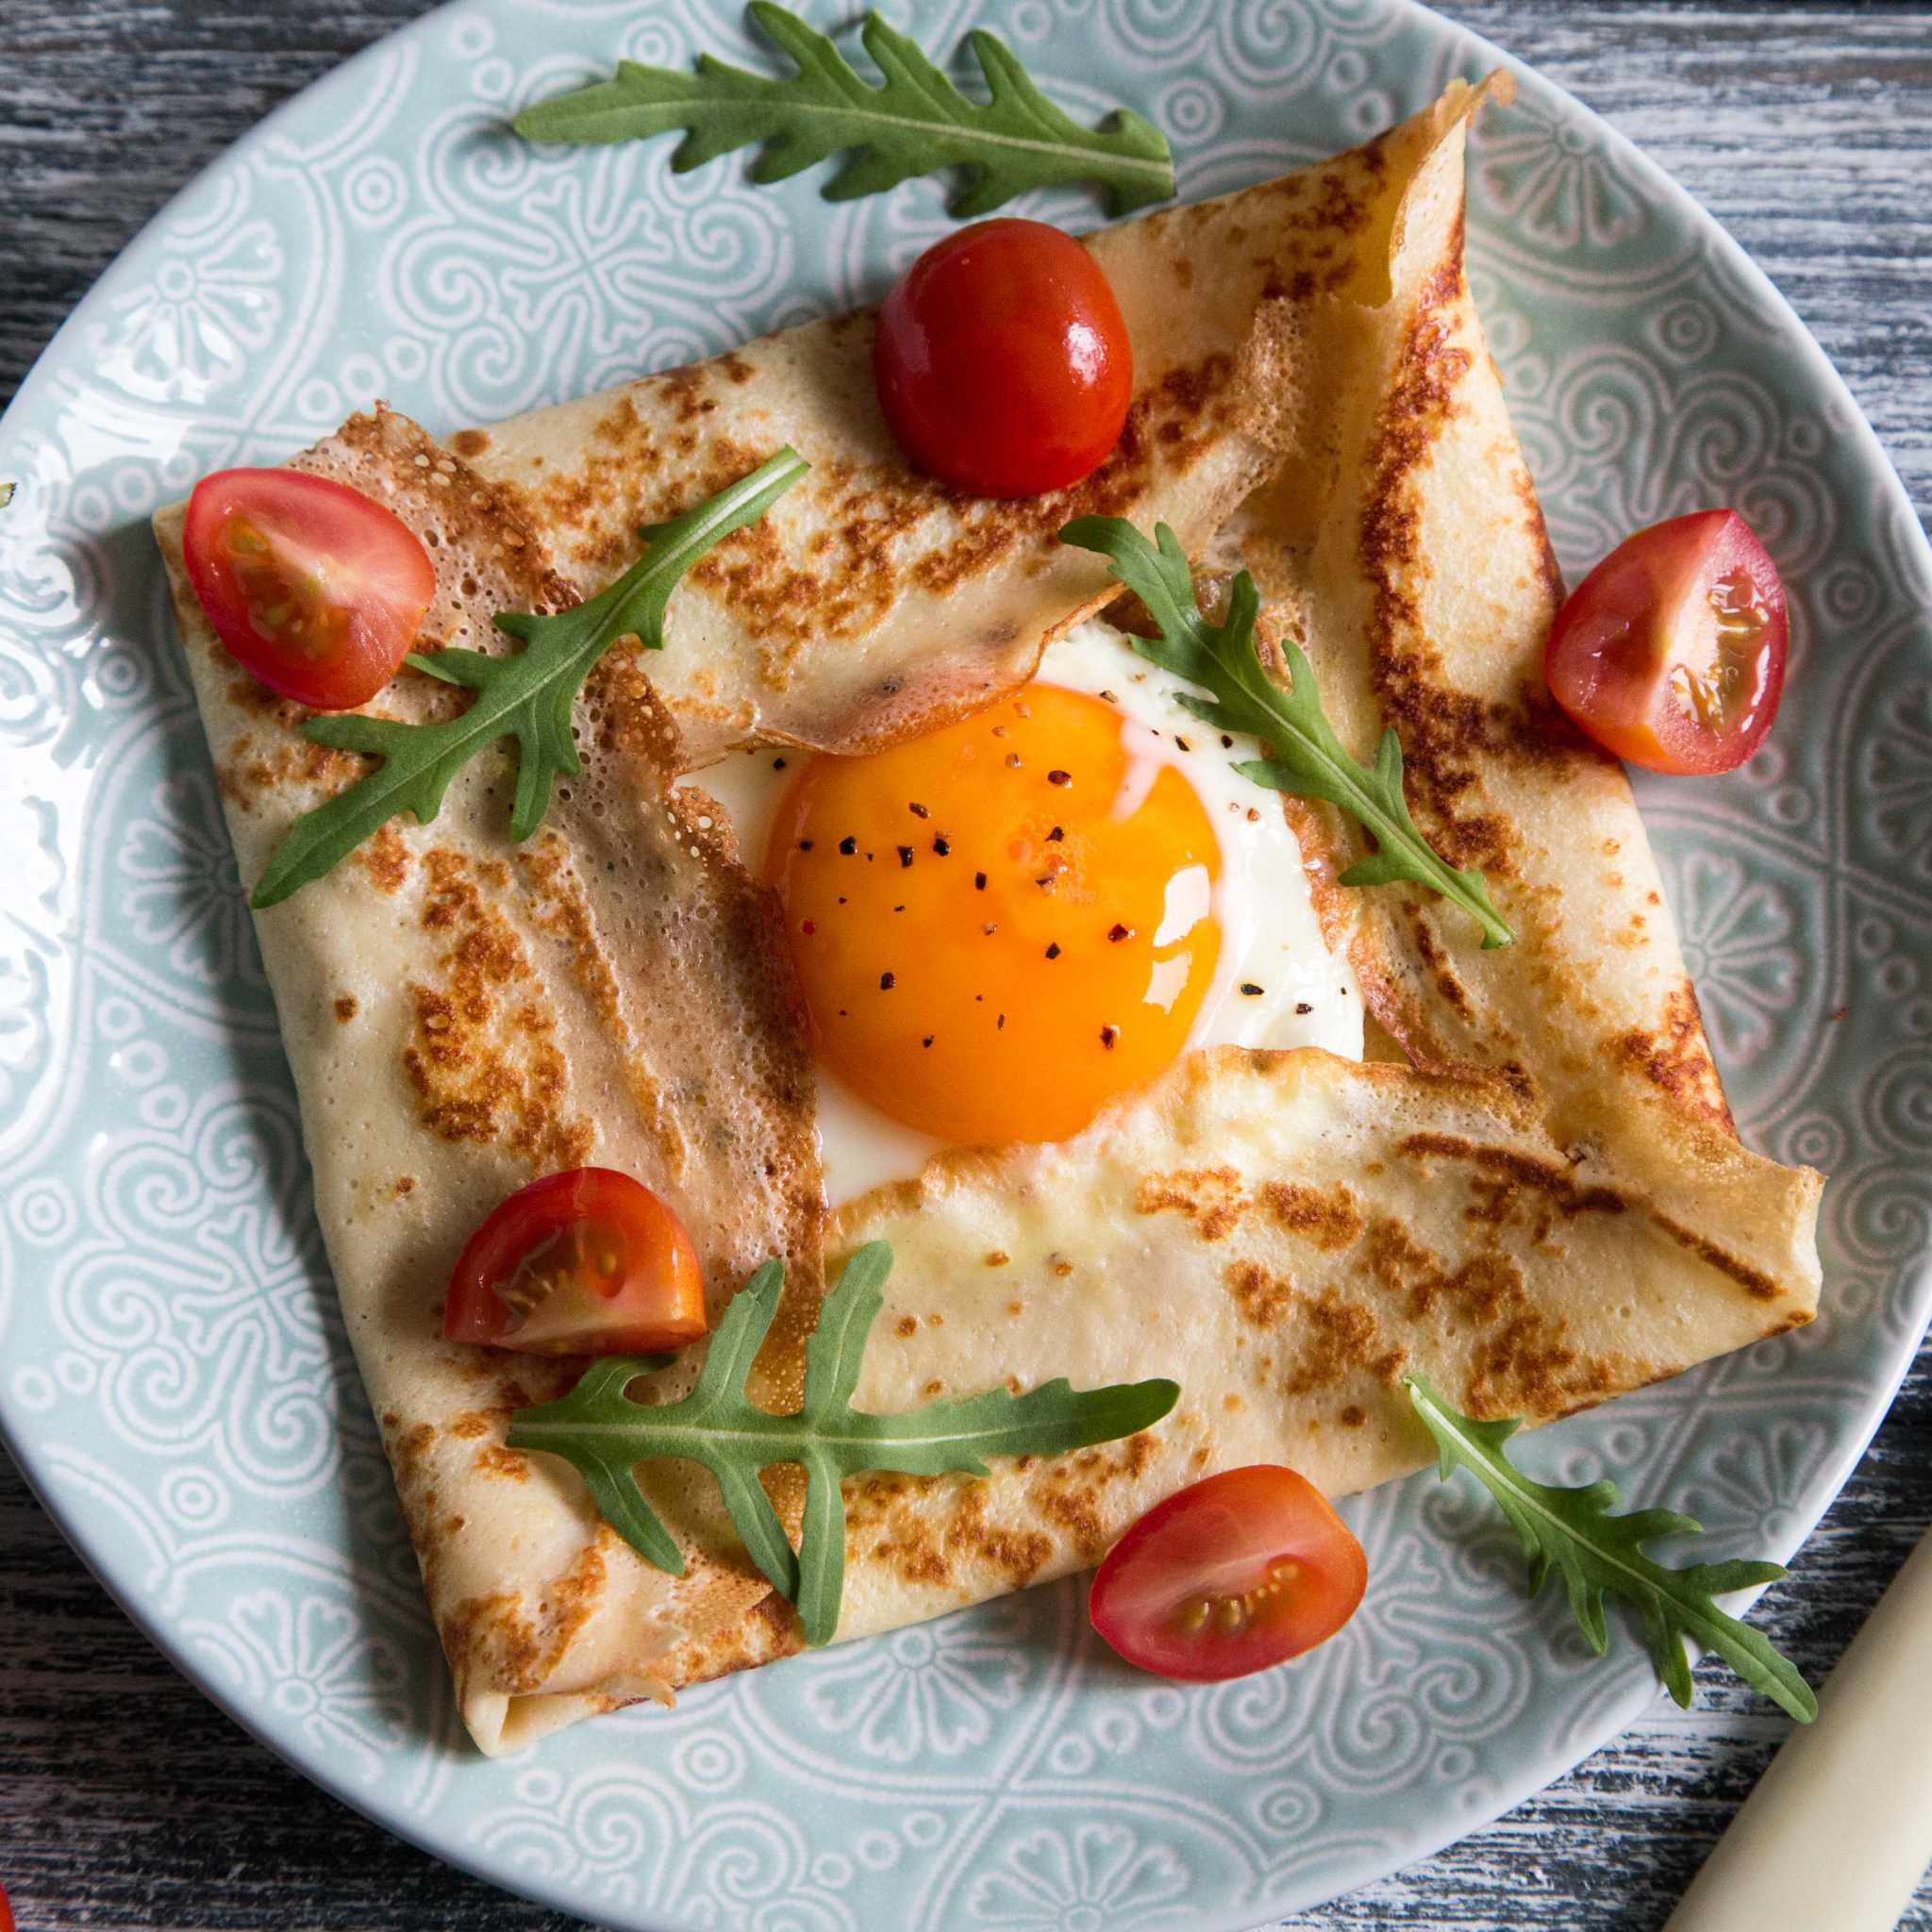 Savoury breakfast crepe filled with egg and scattered with chopped cherry tomatoes and rocket